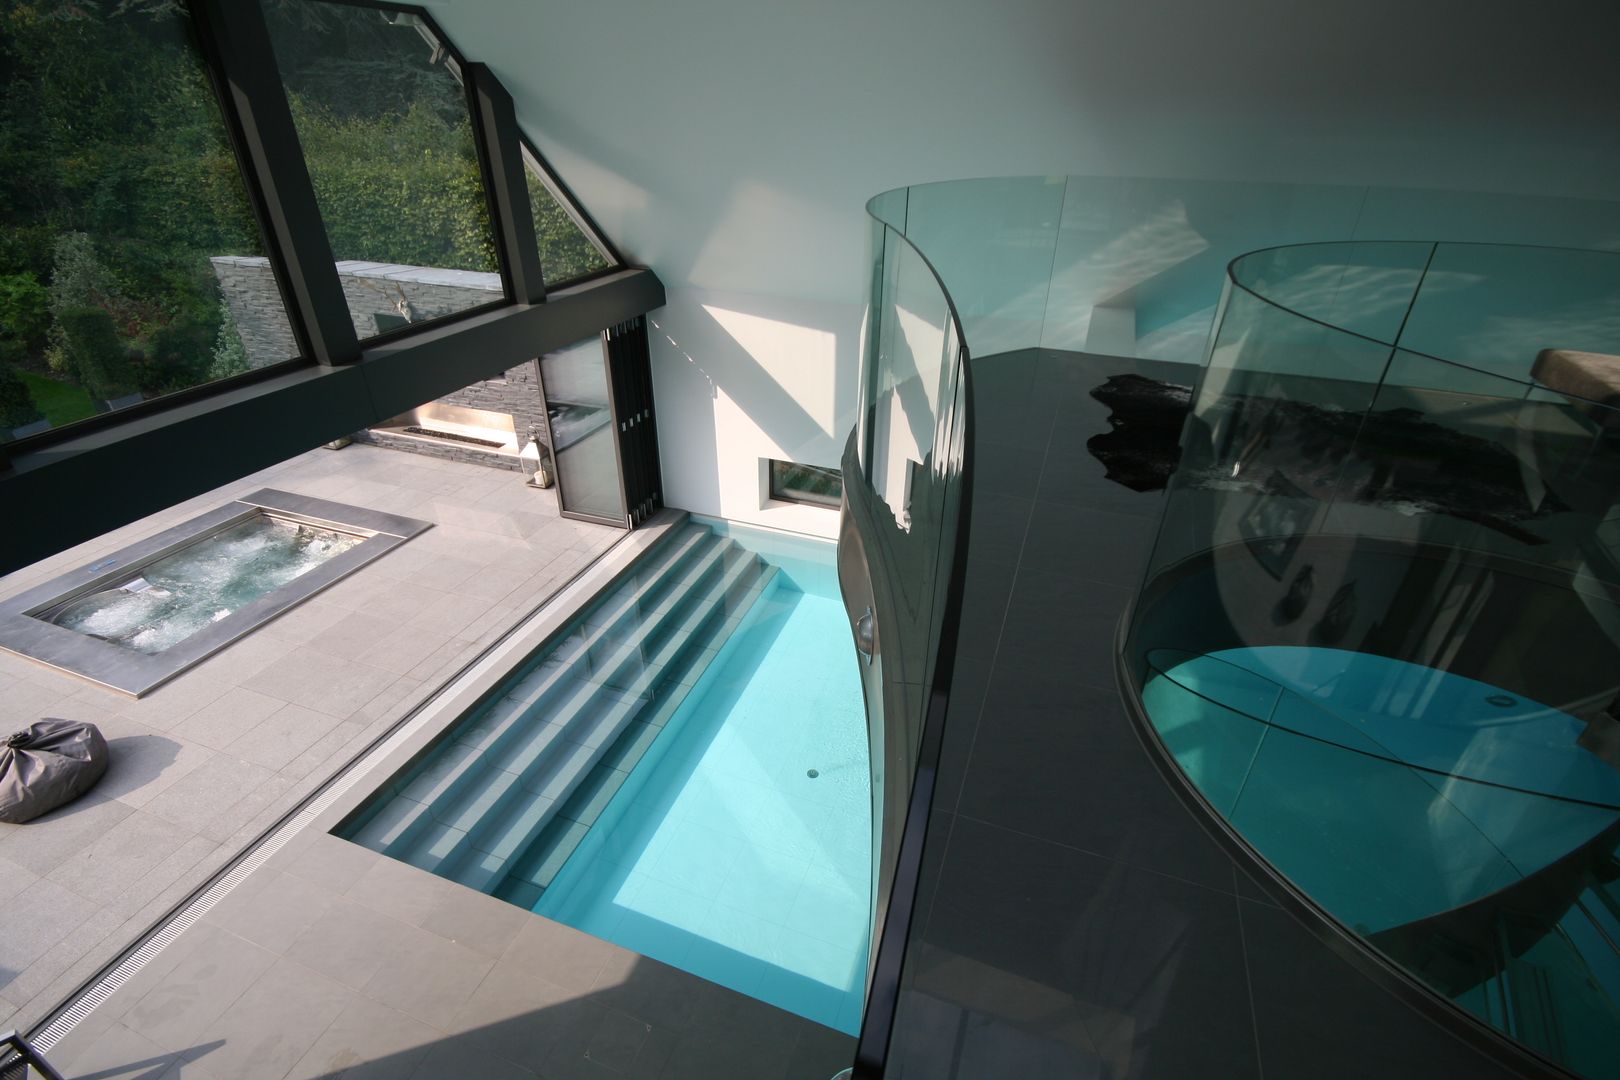 Indoor pool with waterfall features, sauna and stainless steel spa, Tanby Pools Tanby Pools مسبح